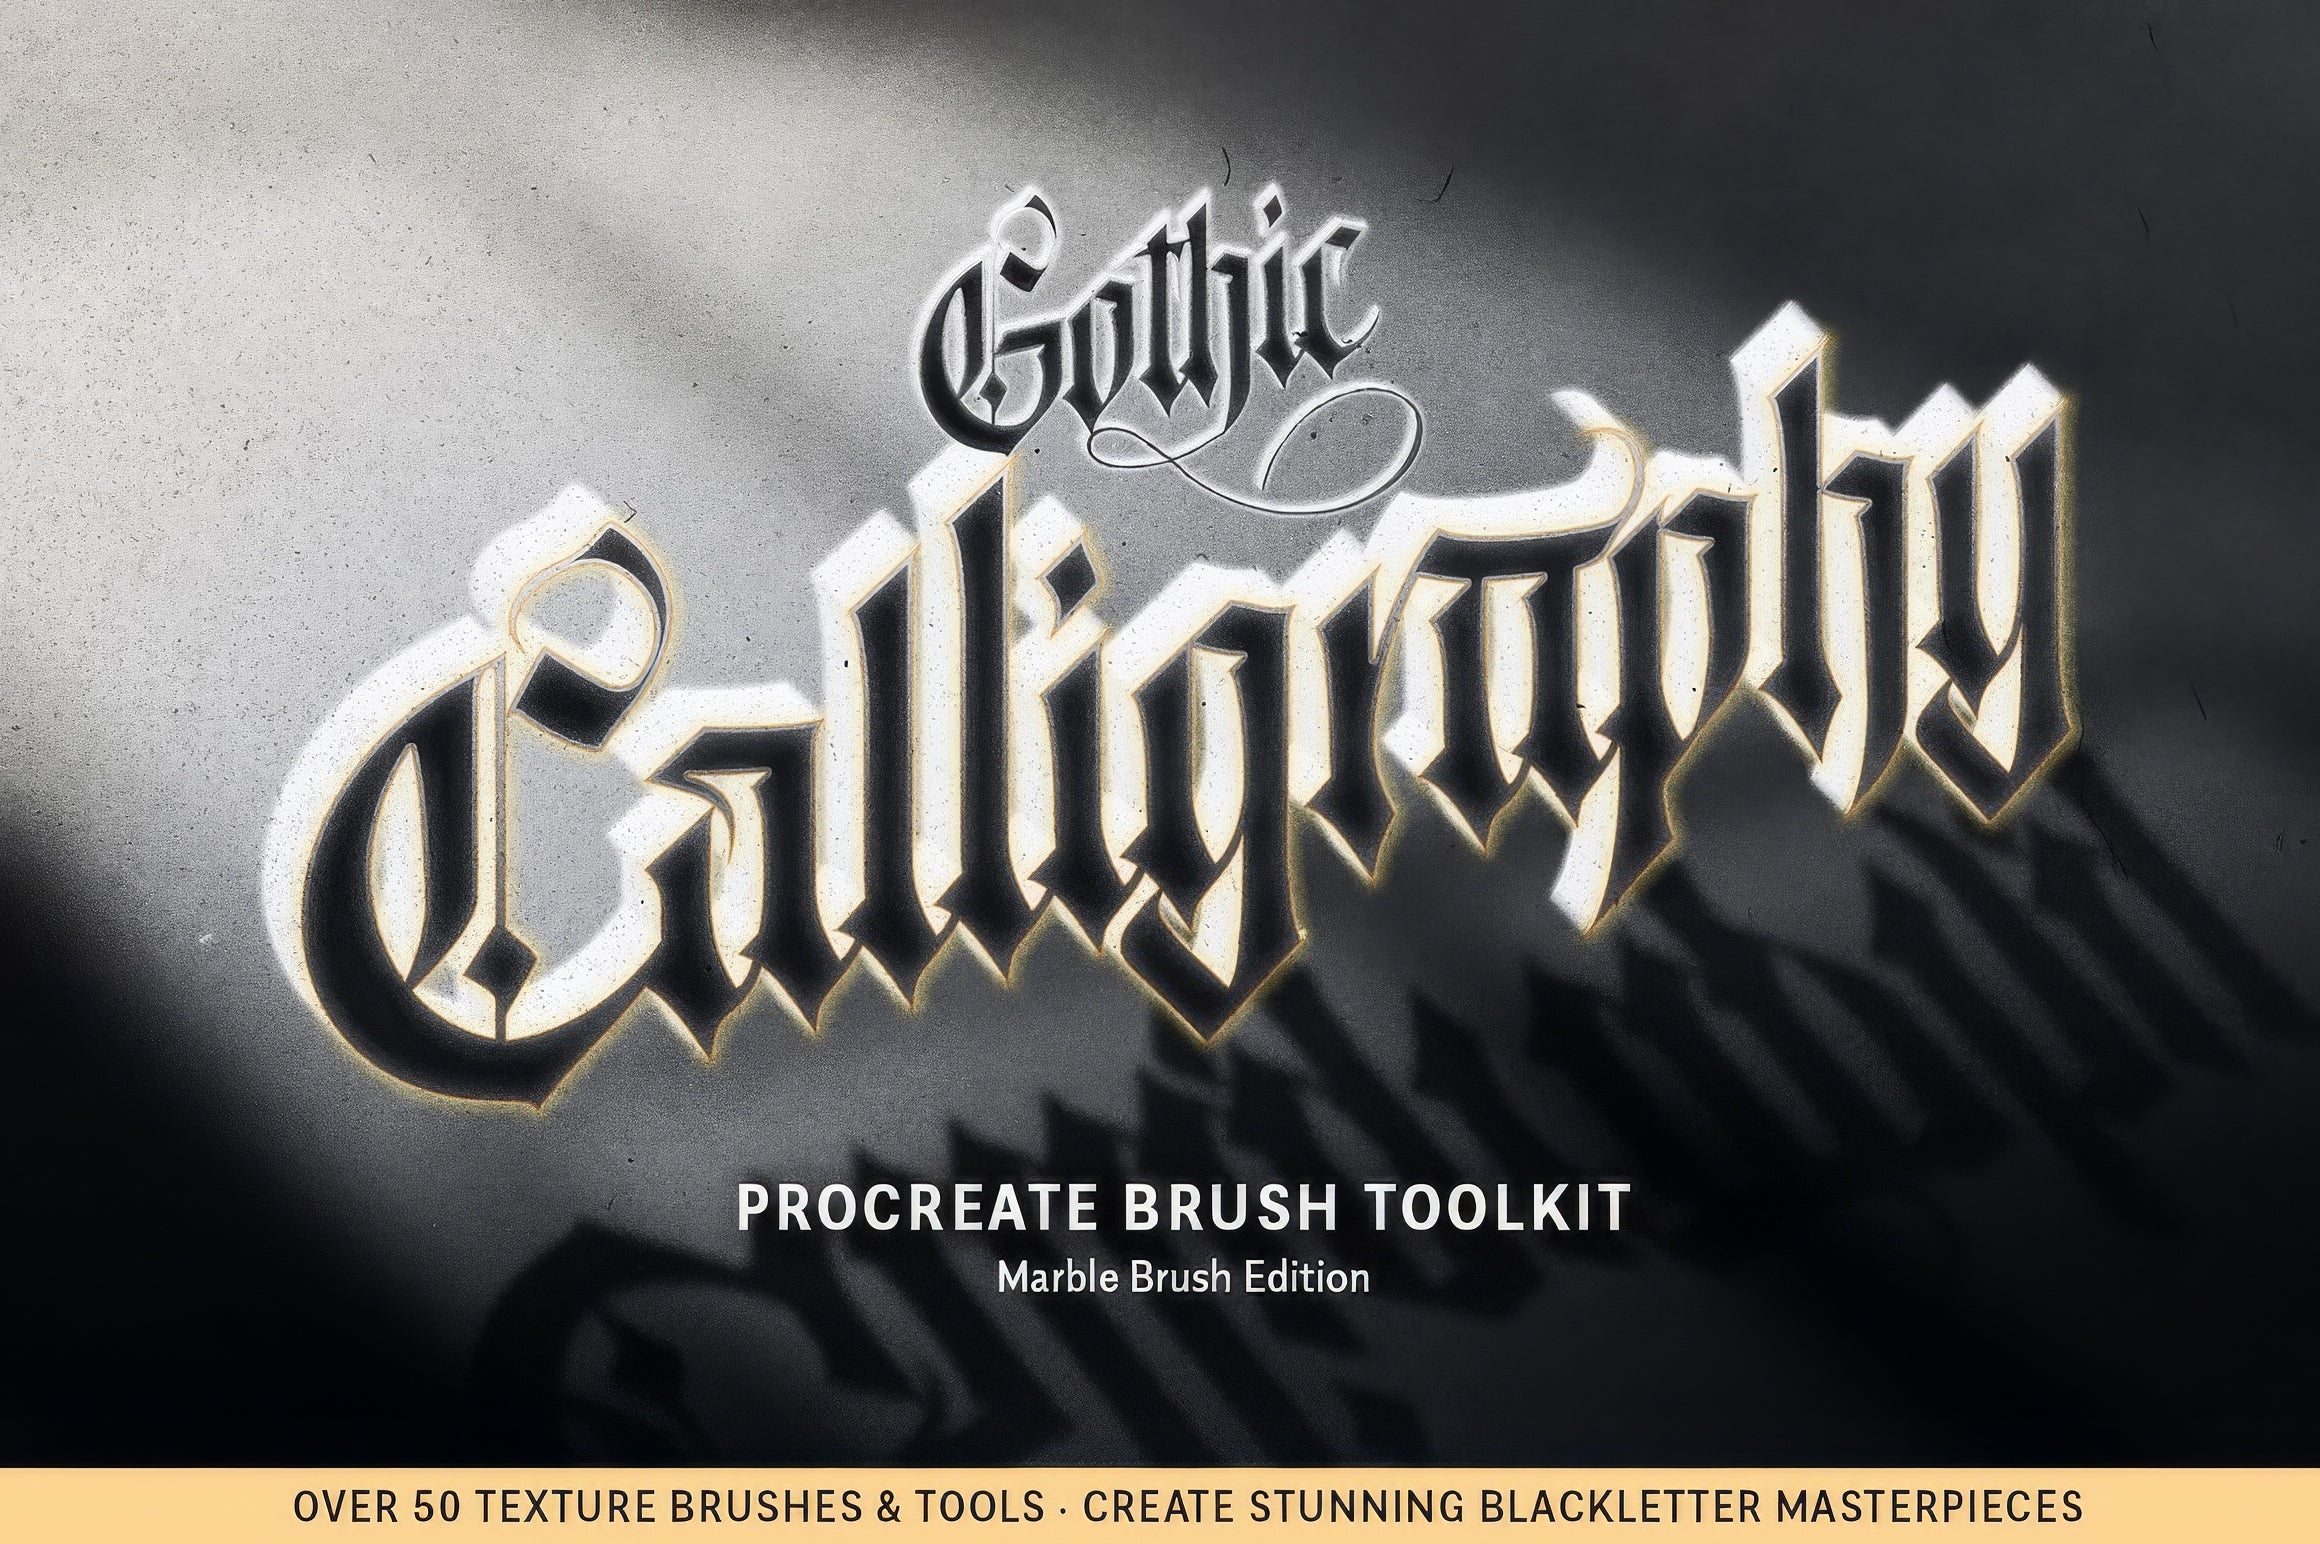 The Marble Gothic Calligraphy Brush Toolkit